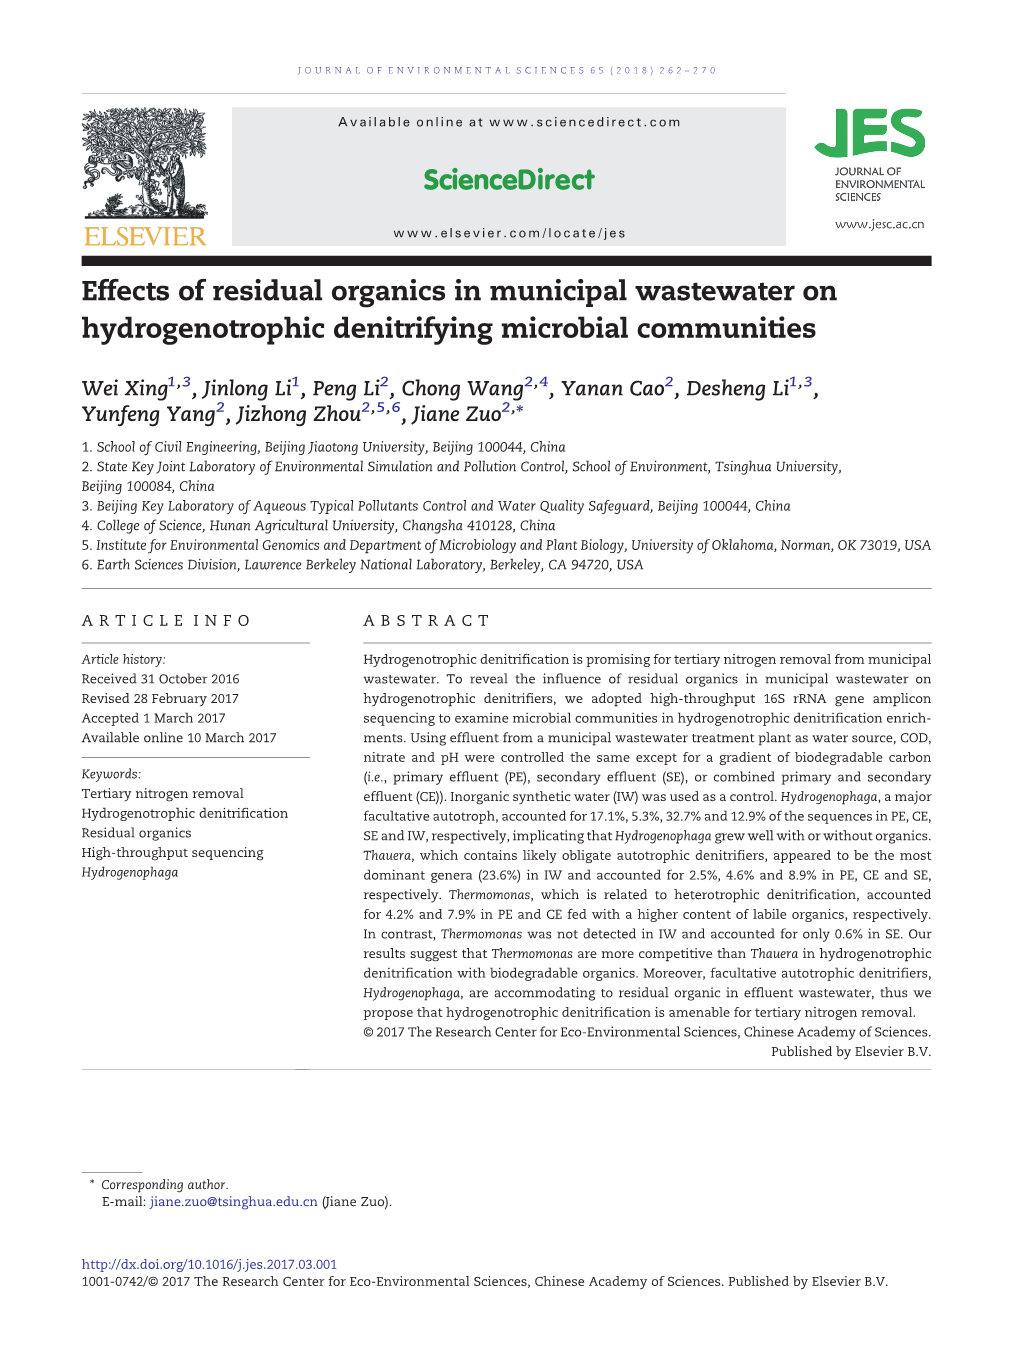 Effects of Residual Organics in Municipal Wastewater on Hydrogenotrophic Denitrifying Microbial Communities